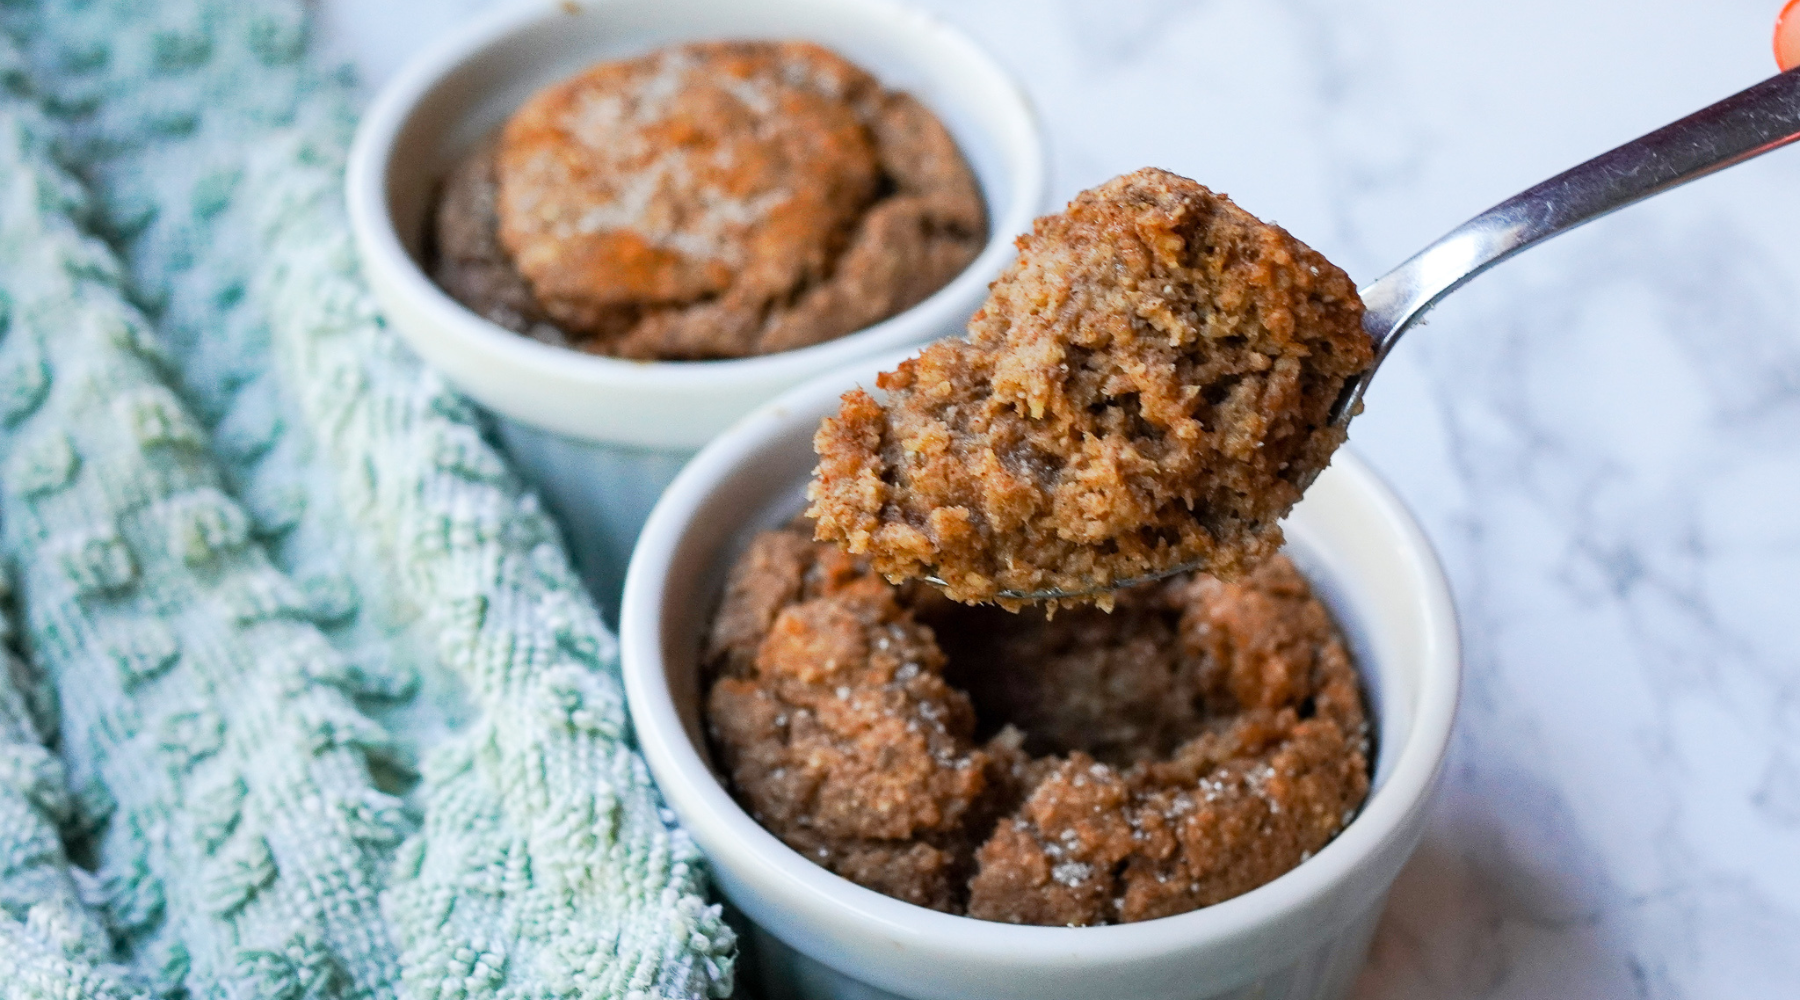 SNICKER-DOODLE BAKED OAT CAKES